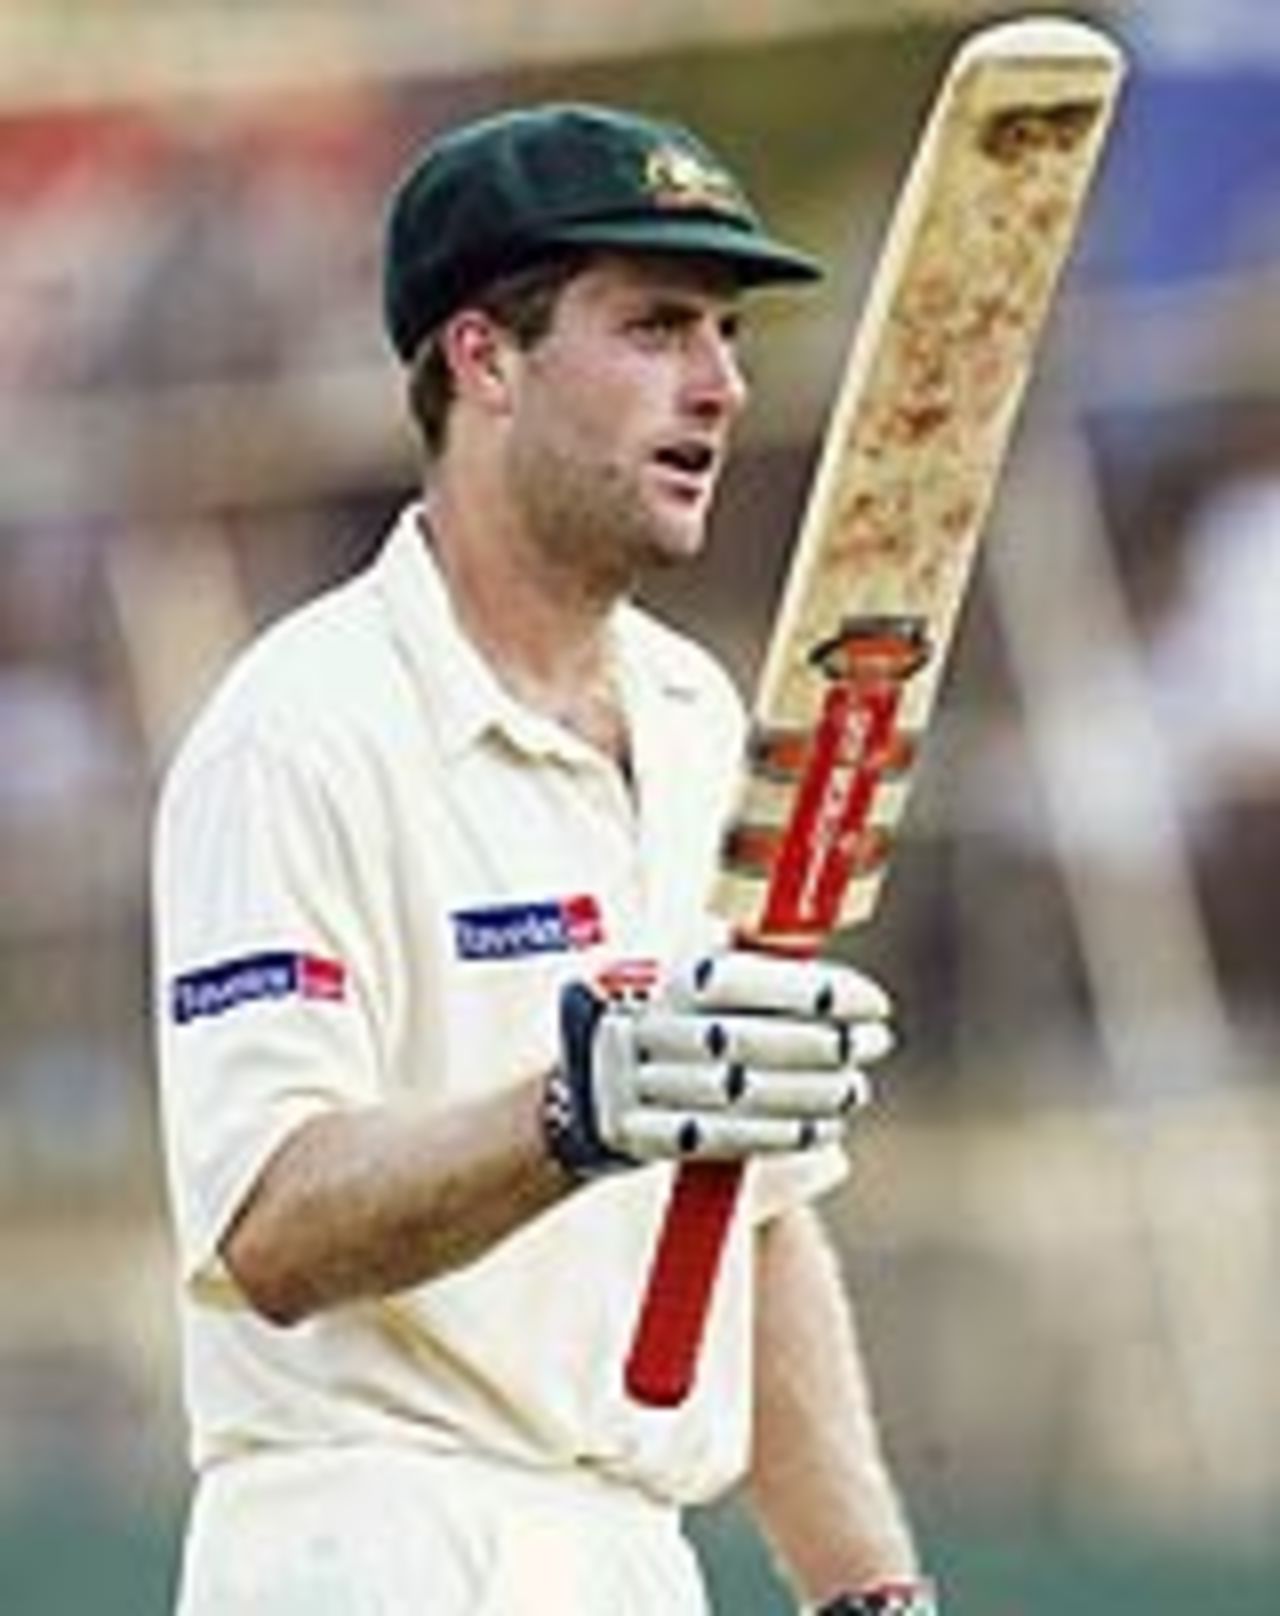 Simon Katich acknowledges the applause after his innings of 86, Sri Lanka v Australia, 3rd Test, Colombo, 4th day, March 27, 2004